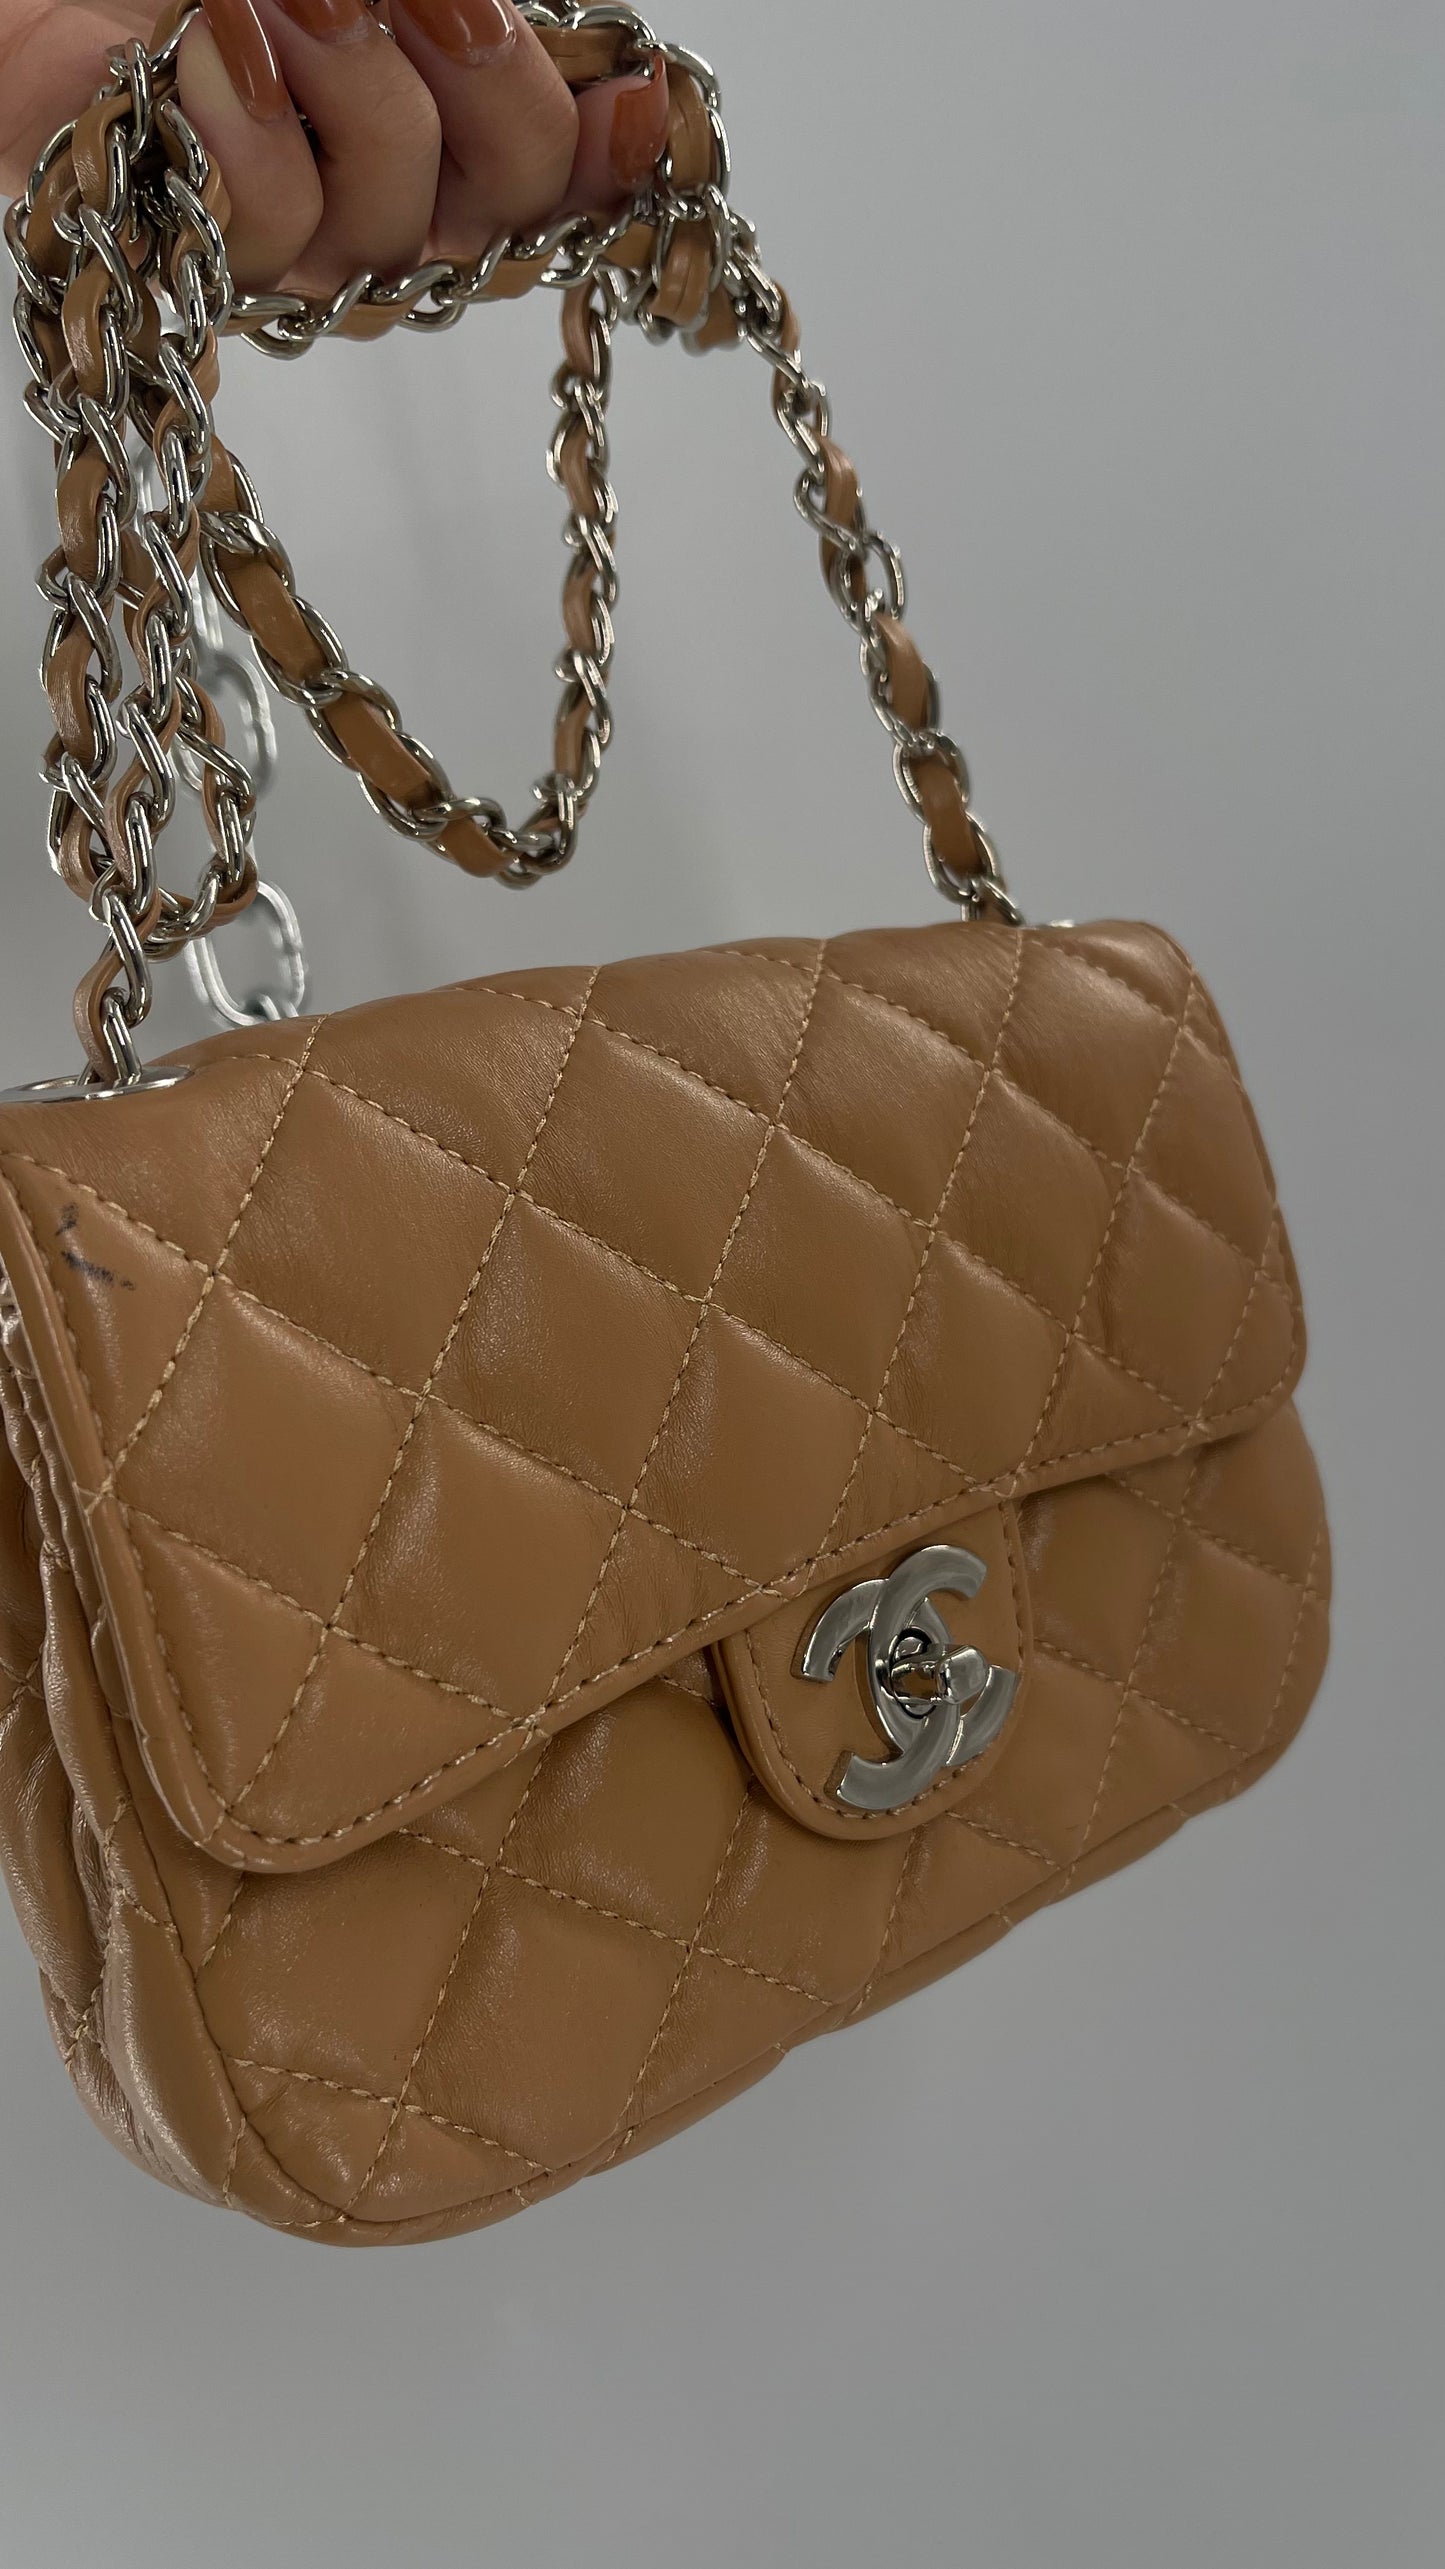 Tan Metallic Quilted Inauthentic Chanel Bag with Silver Chain Strap